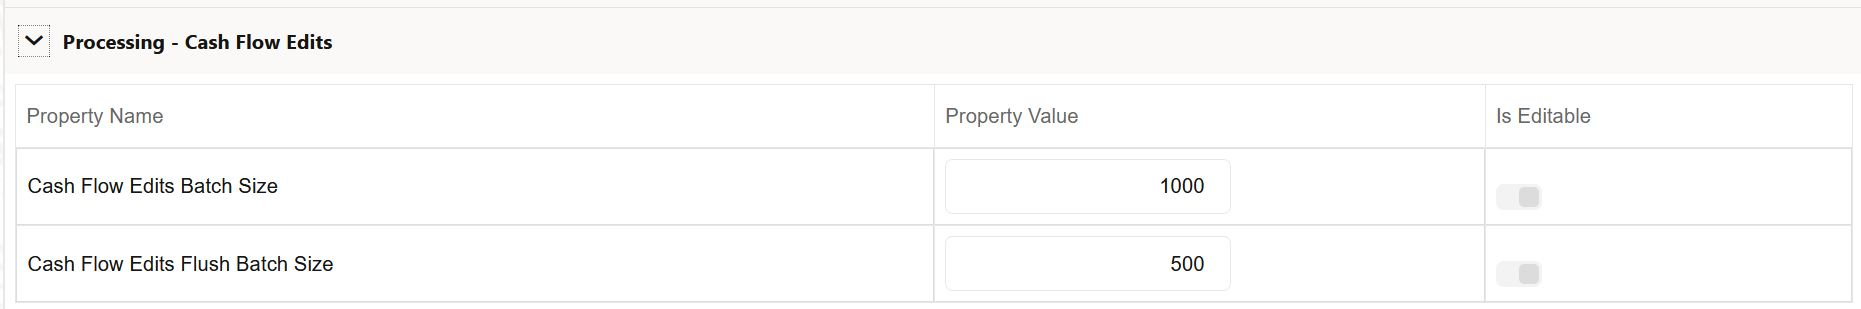 Processing-Cash Flow Edits section of Application Preference